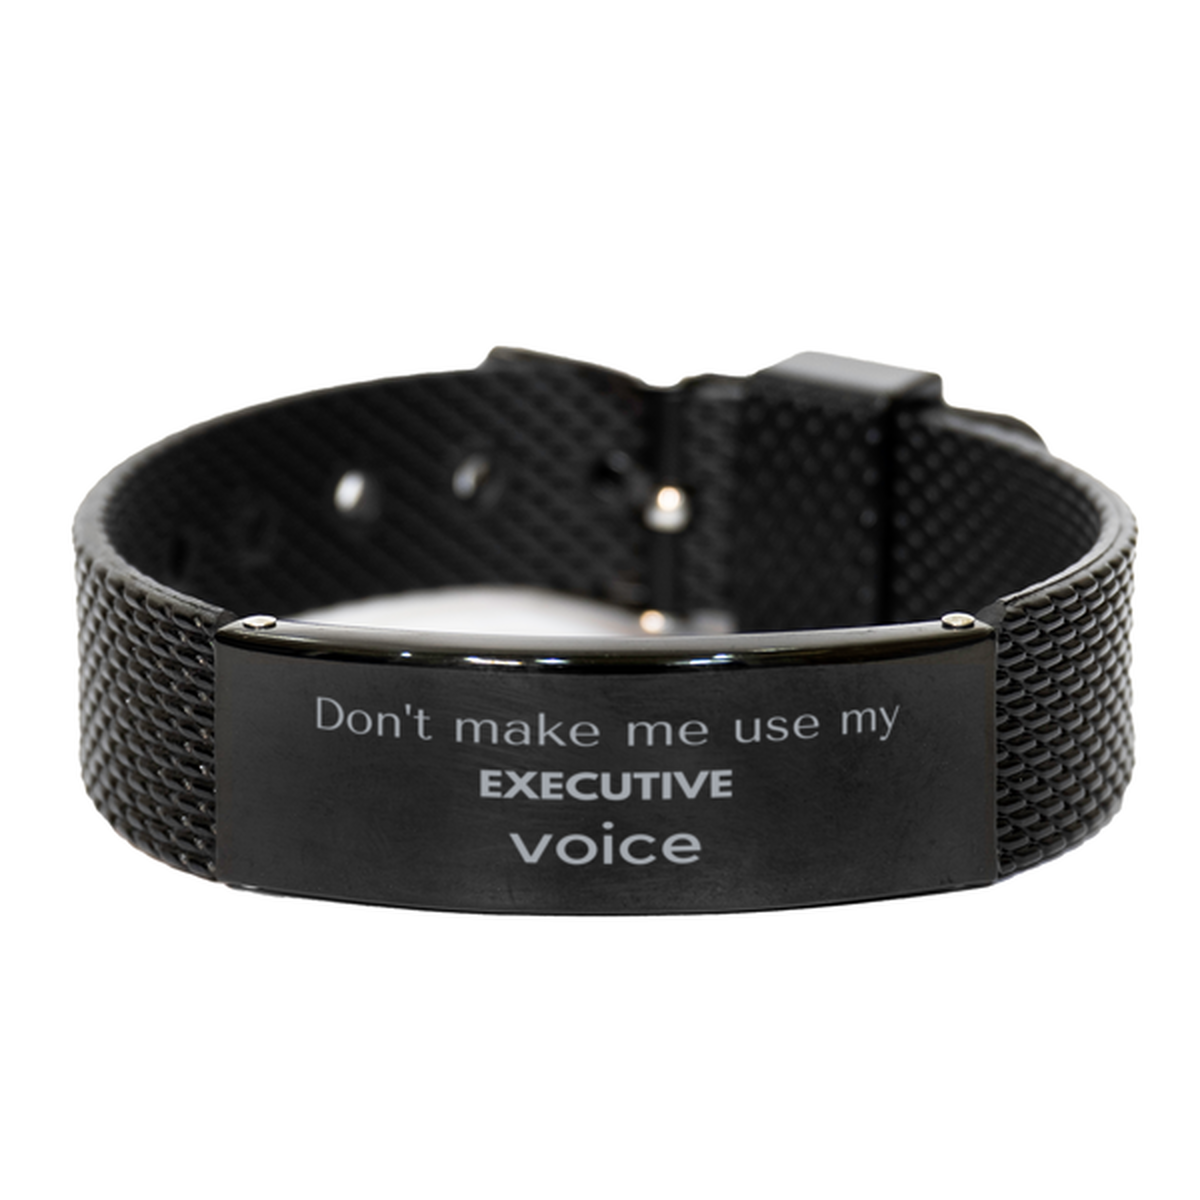 Don't make me use my Executive voice, Sarcasm Executive Gifts, Christmas Executive Black Shark Mesh Bracelet Birthday Unique Gifts For Executive Coworkers, Men, Women, Colleague, Friends